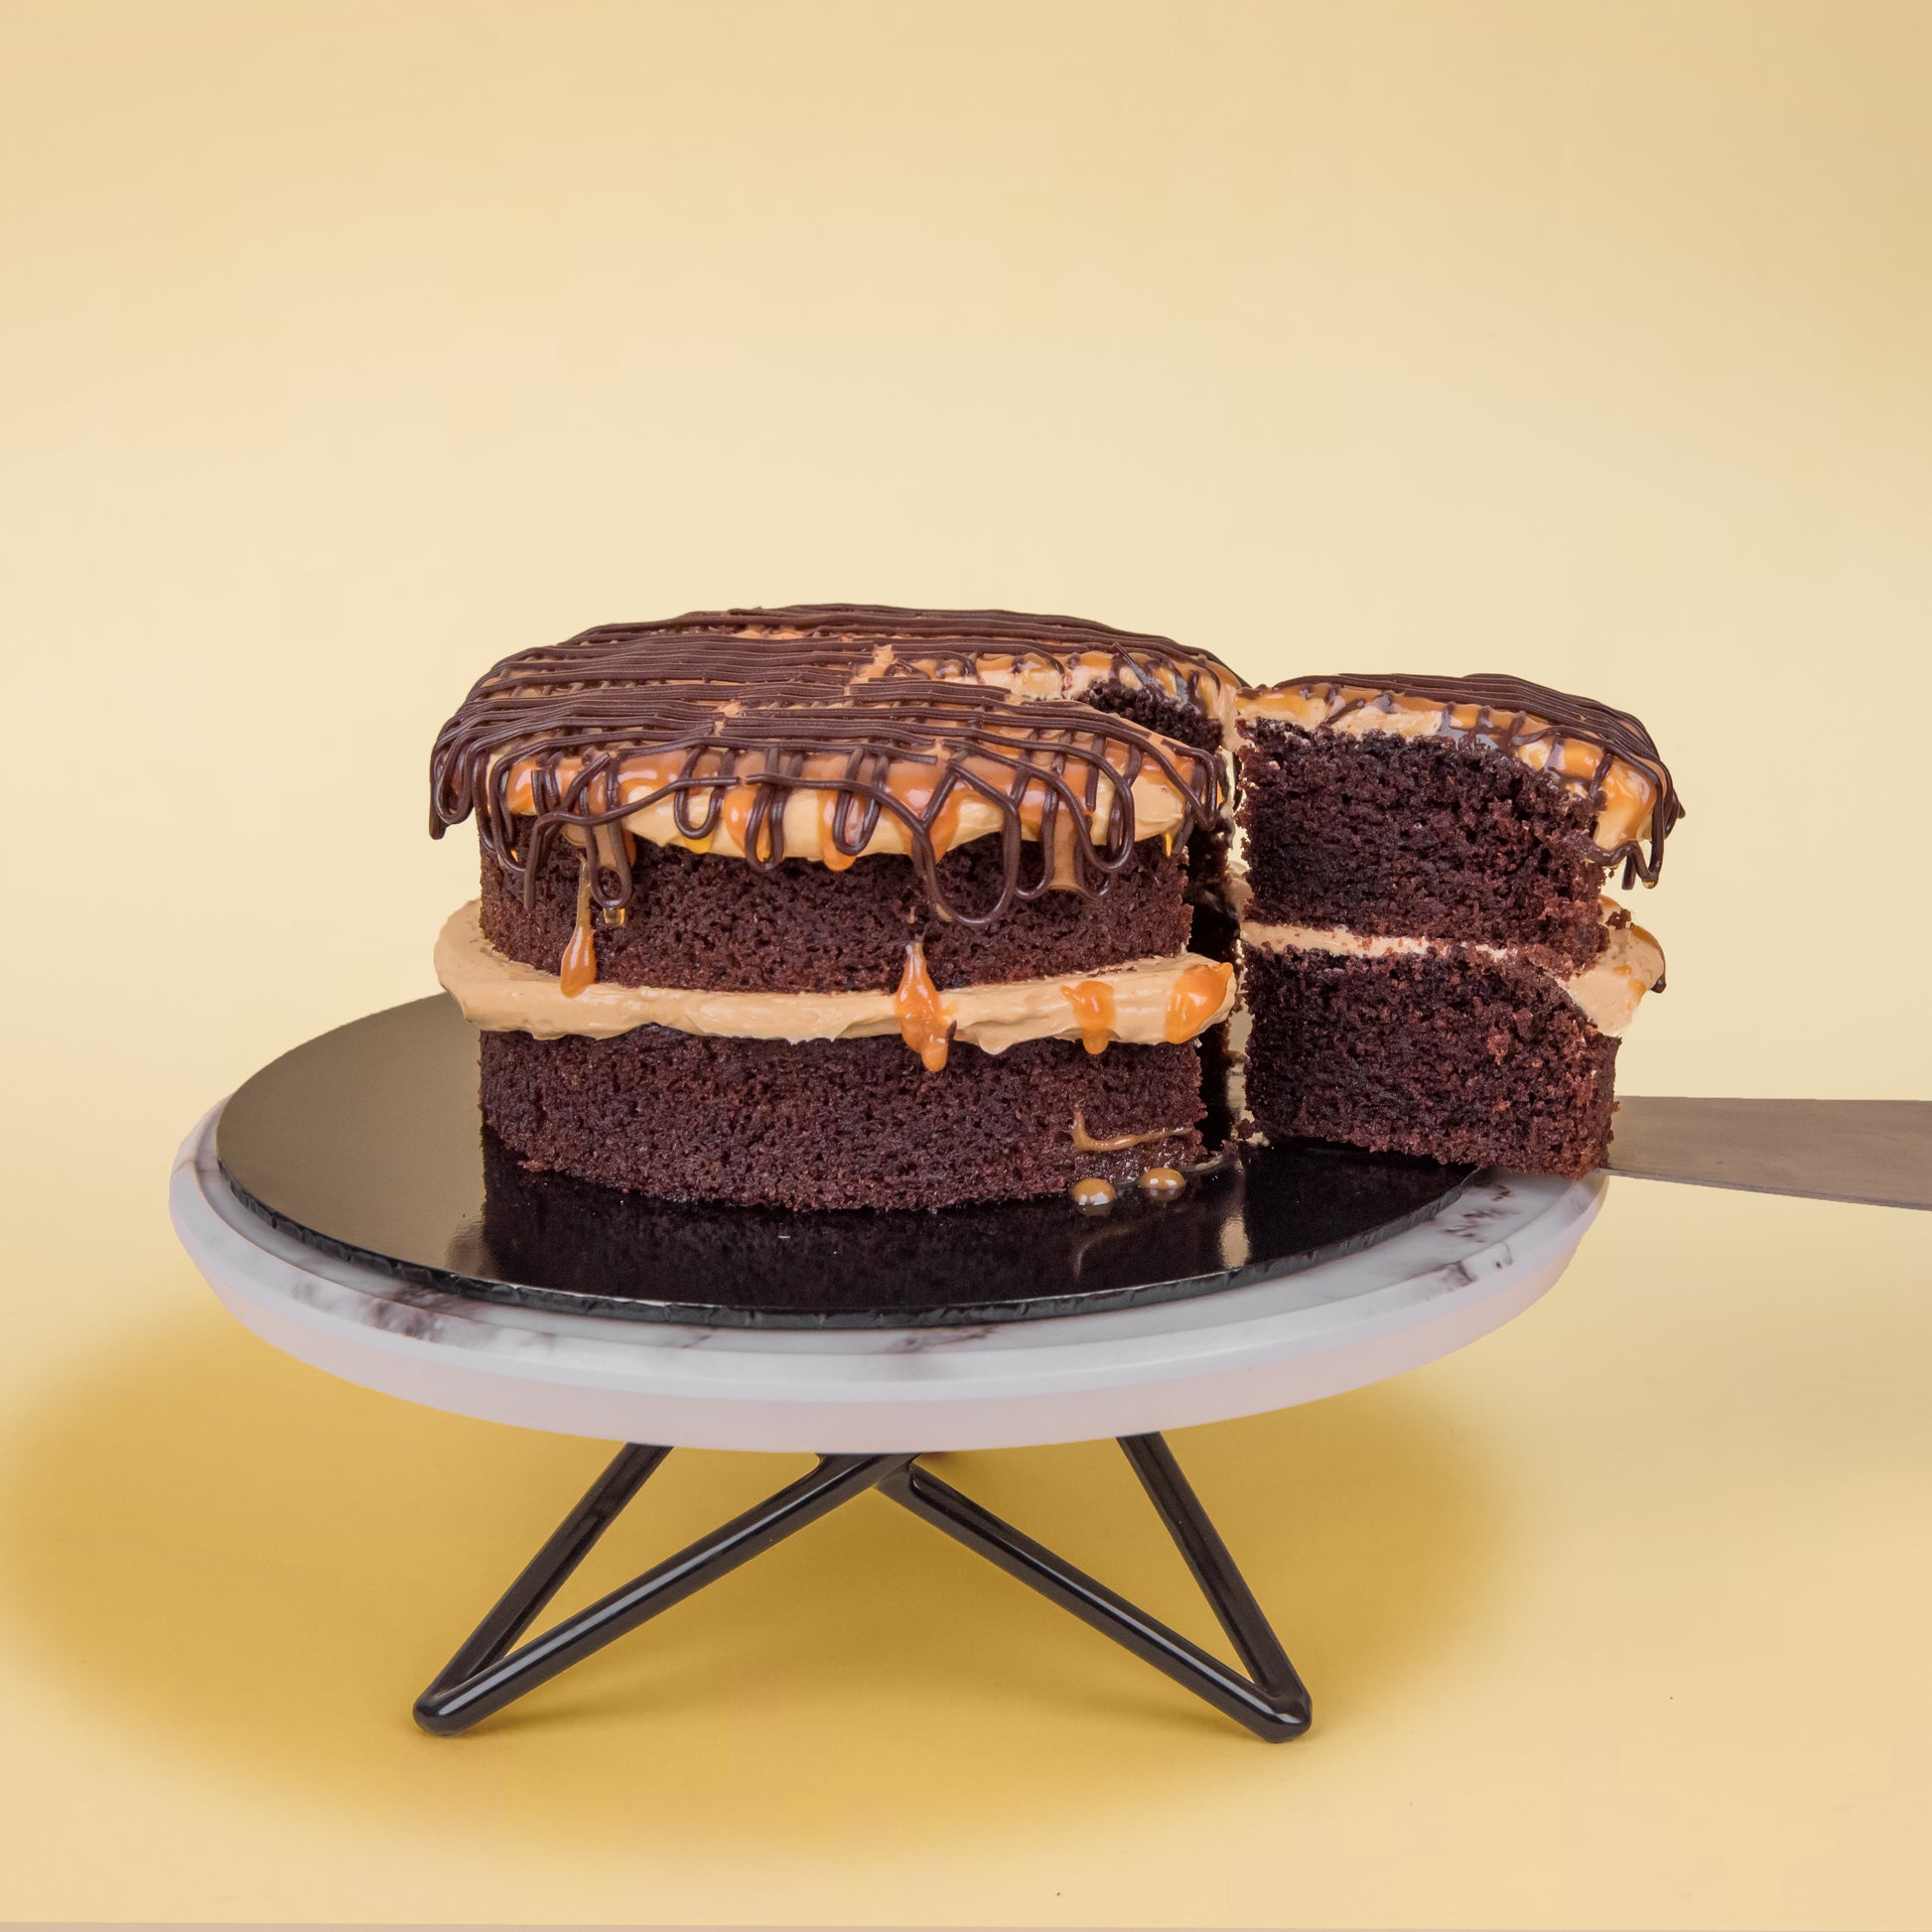 Serving a slice of Mini Salted Caramel Chocolate Cake with Chocolate & Salted Caramel Drizzle On Top by Elevete Patisserie